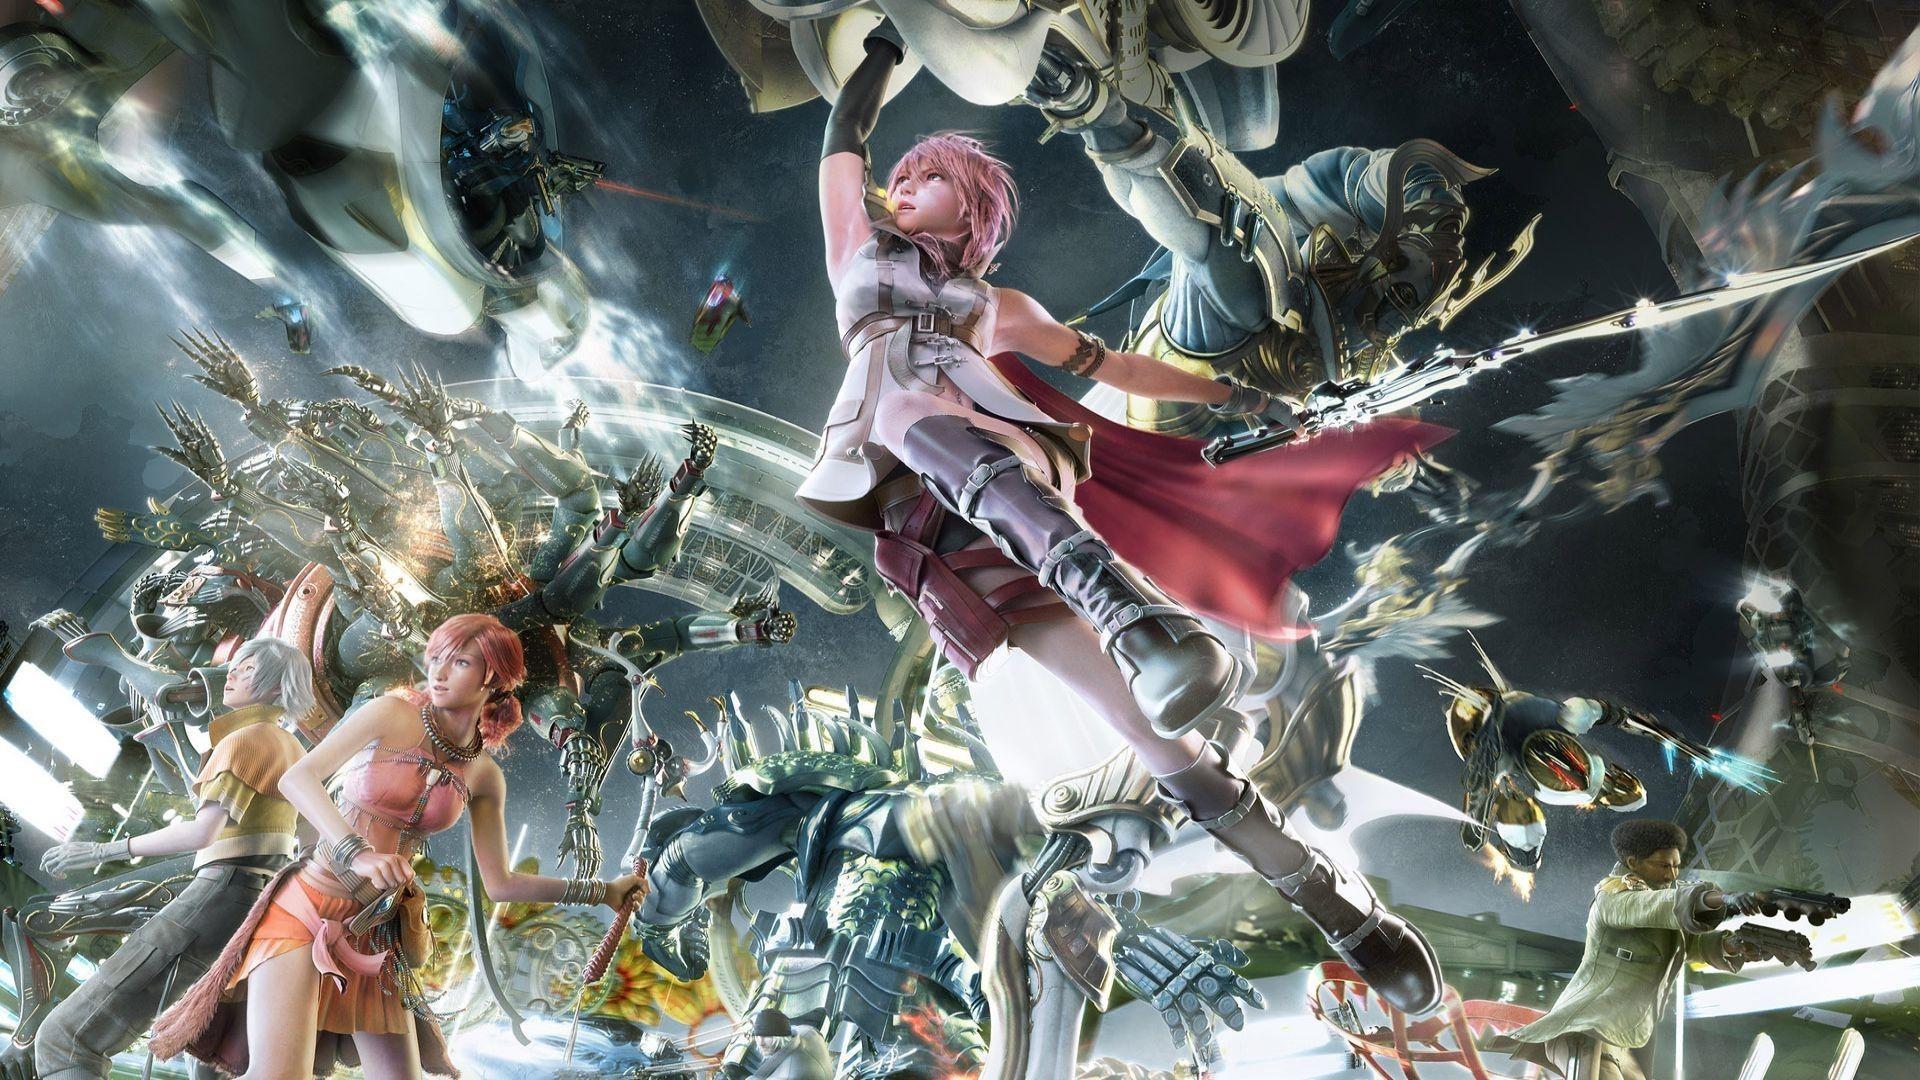 final fantasy xiii ost plus download